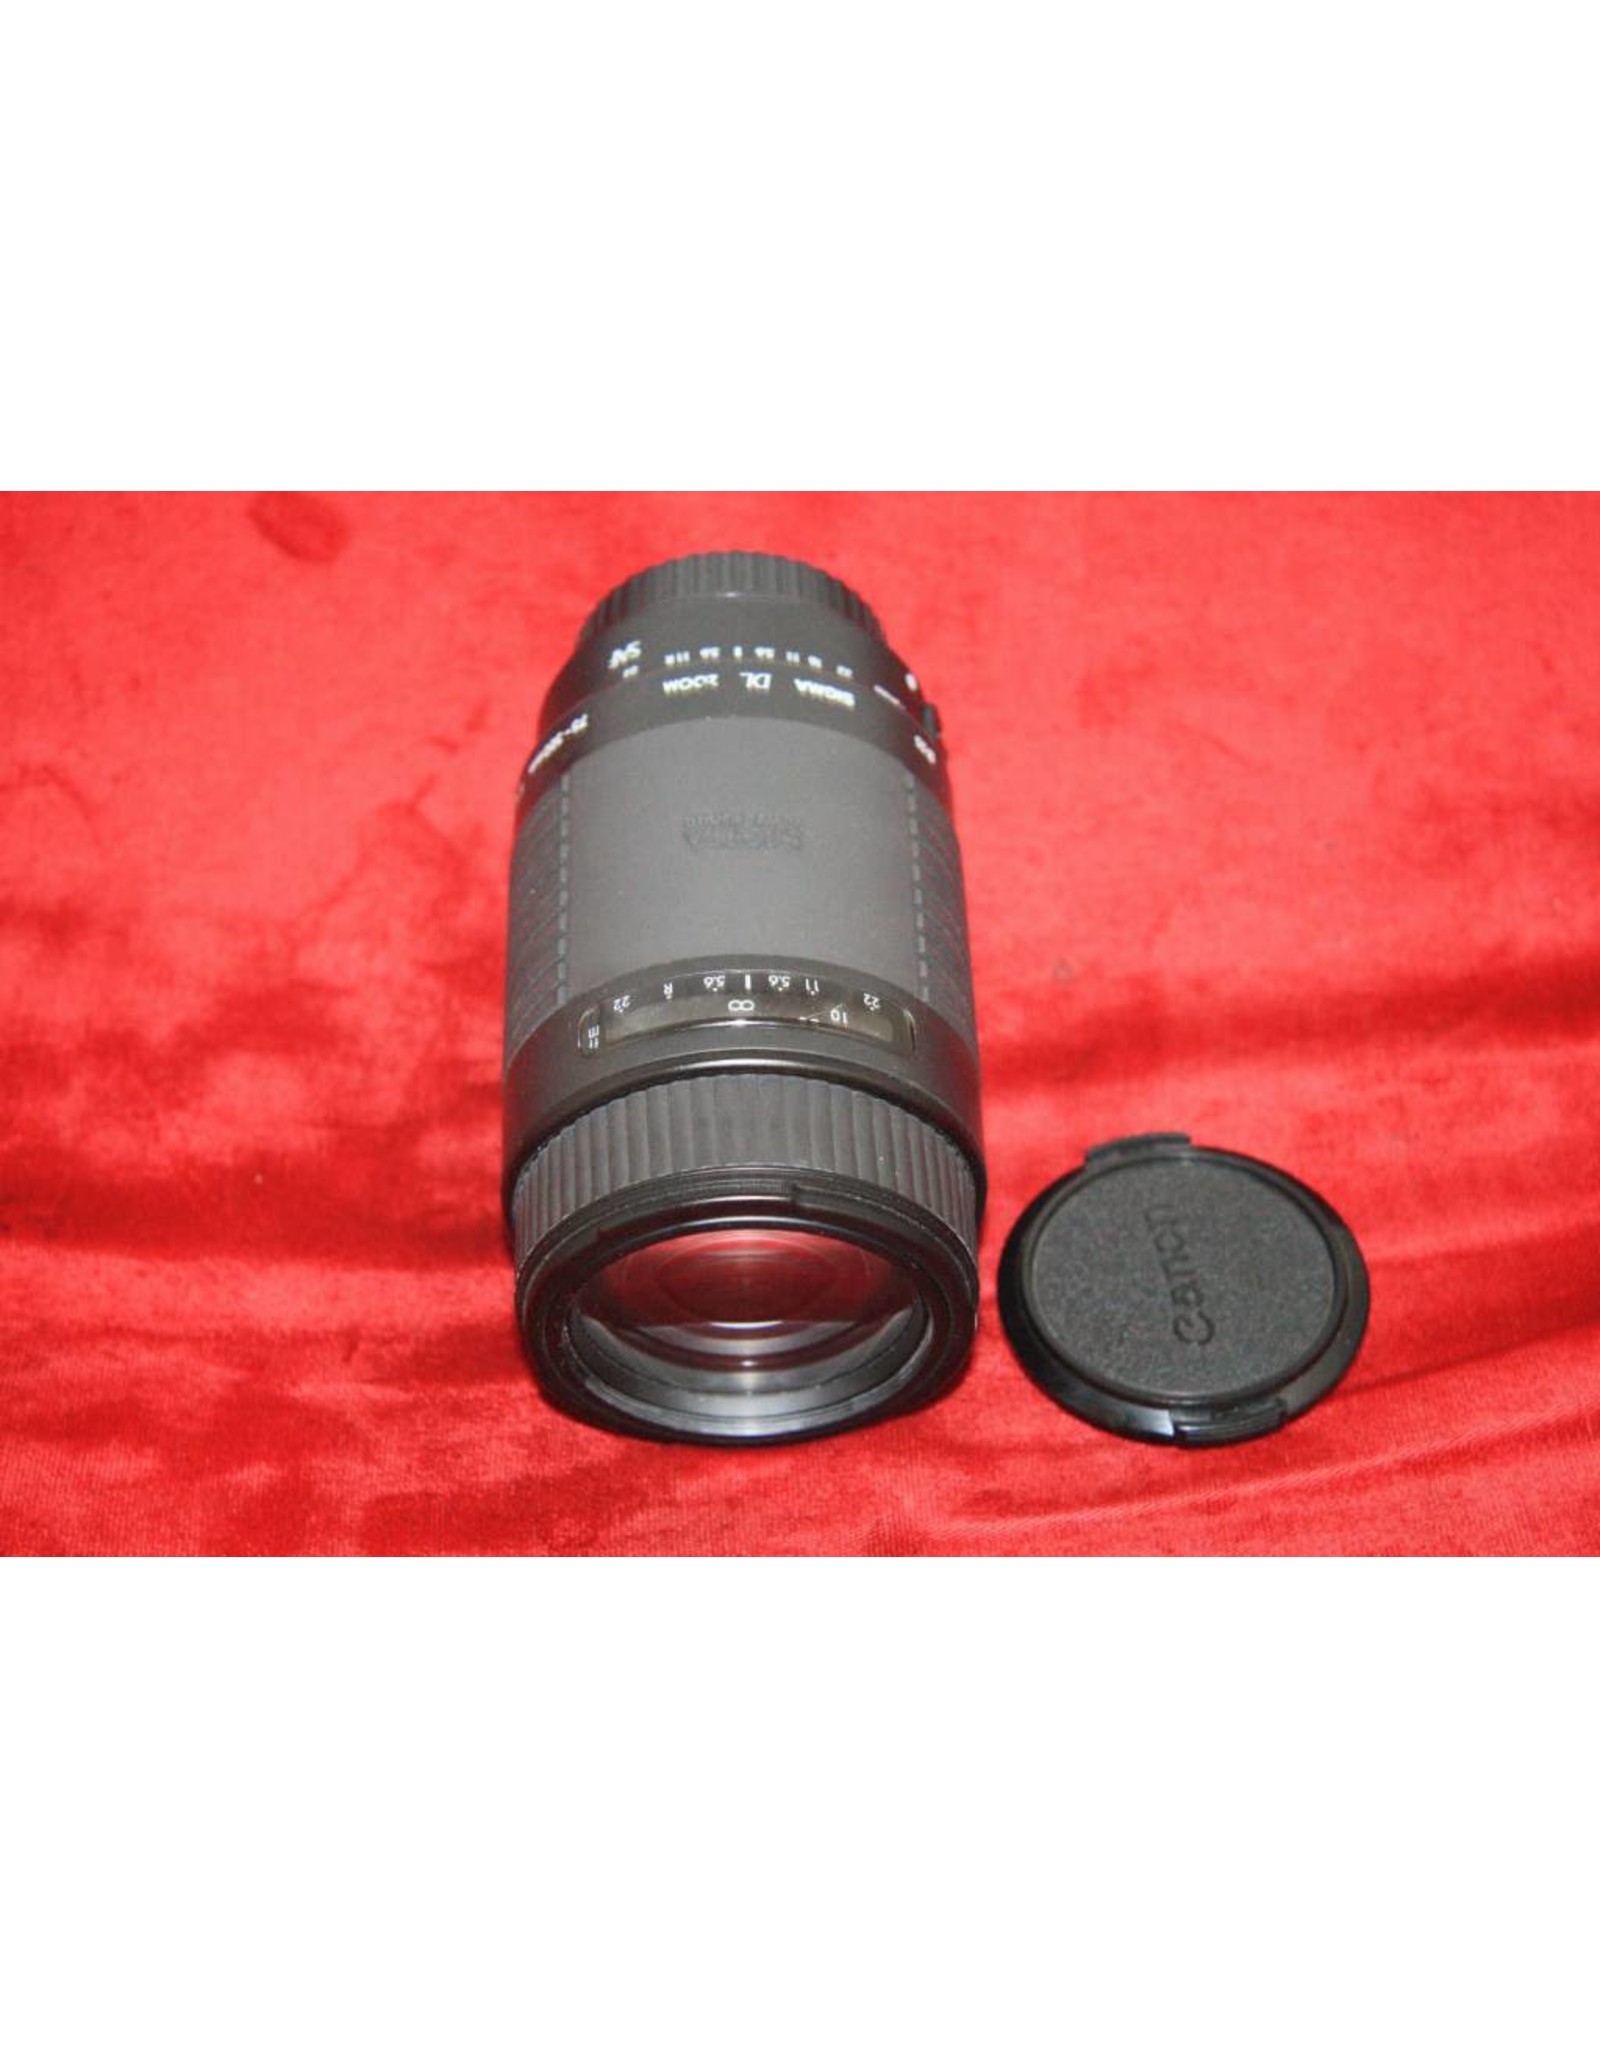 Sigma 75-300 mm f4-5.6 Canon EOS: For Film Camera Only( Auto focus not working)